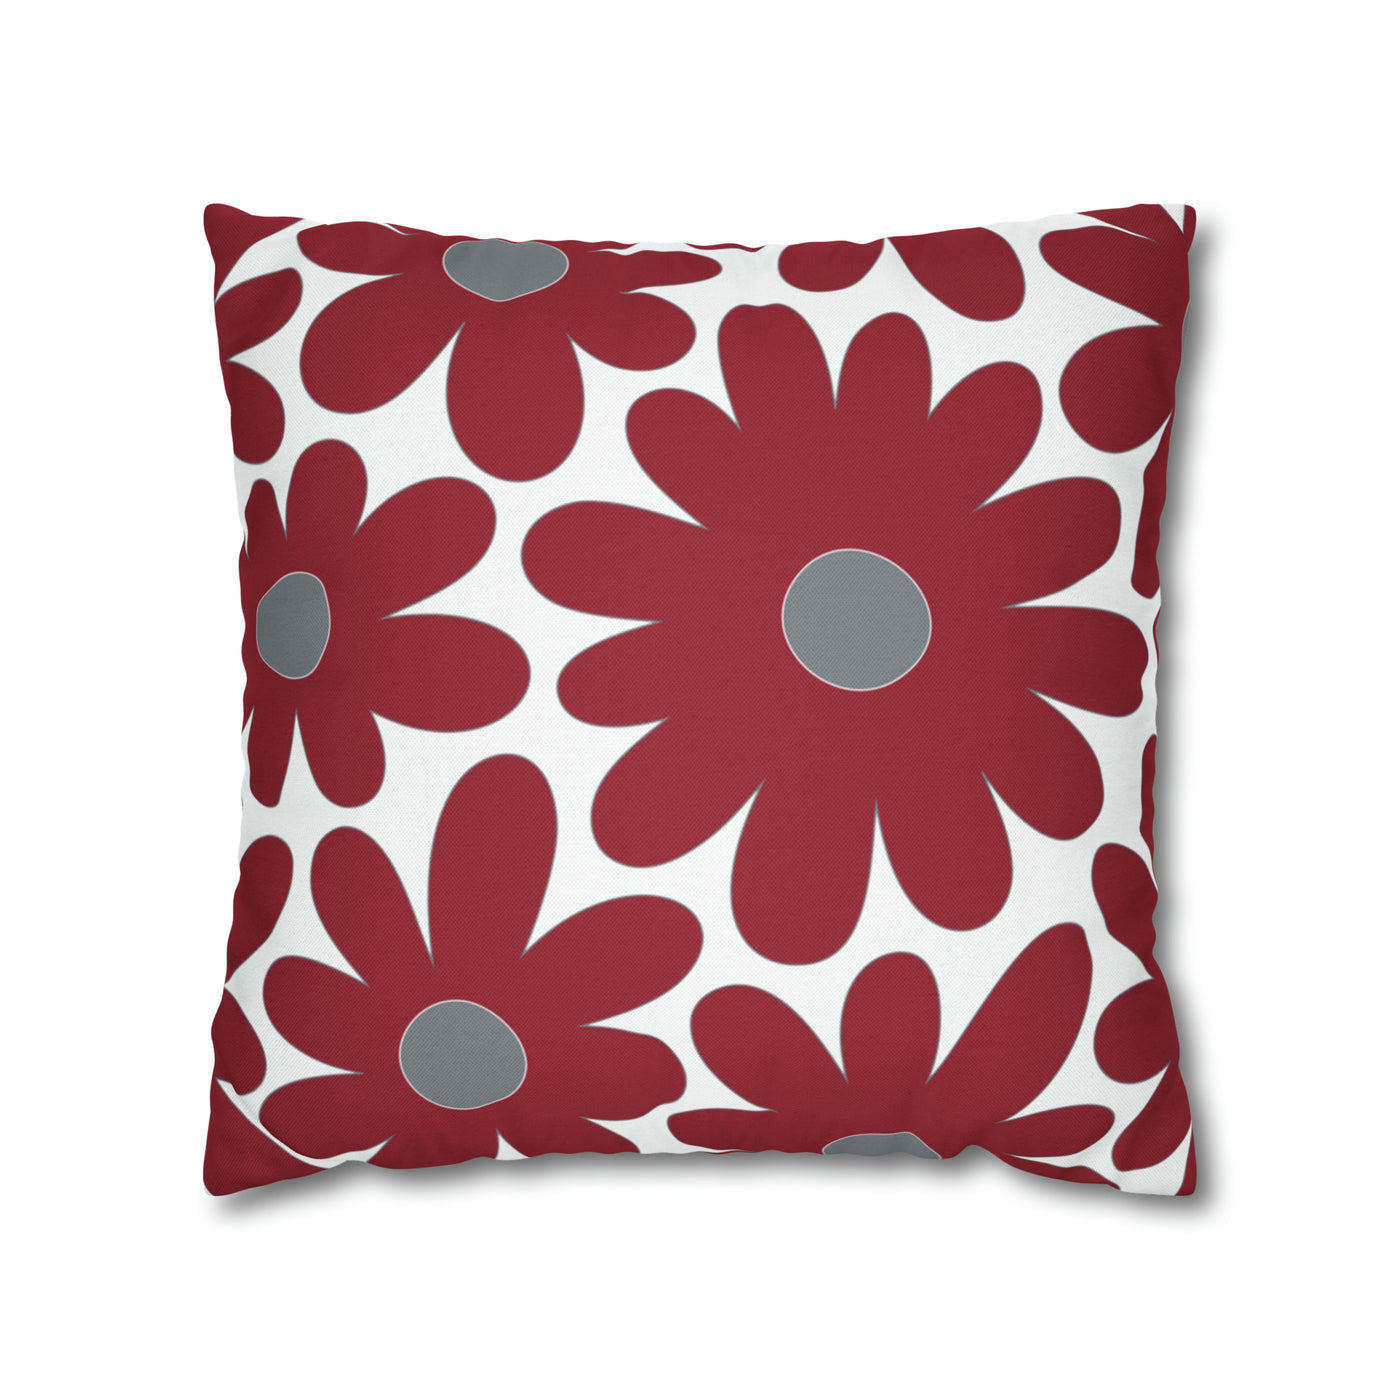 Two Color Double Sided Groovy Flower Pillow - College Dorm Pillow - Bed Party Pillow - Alabama